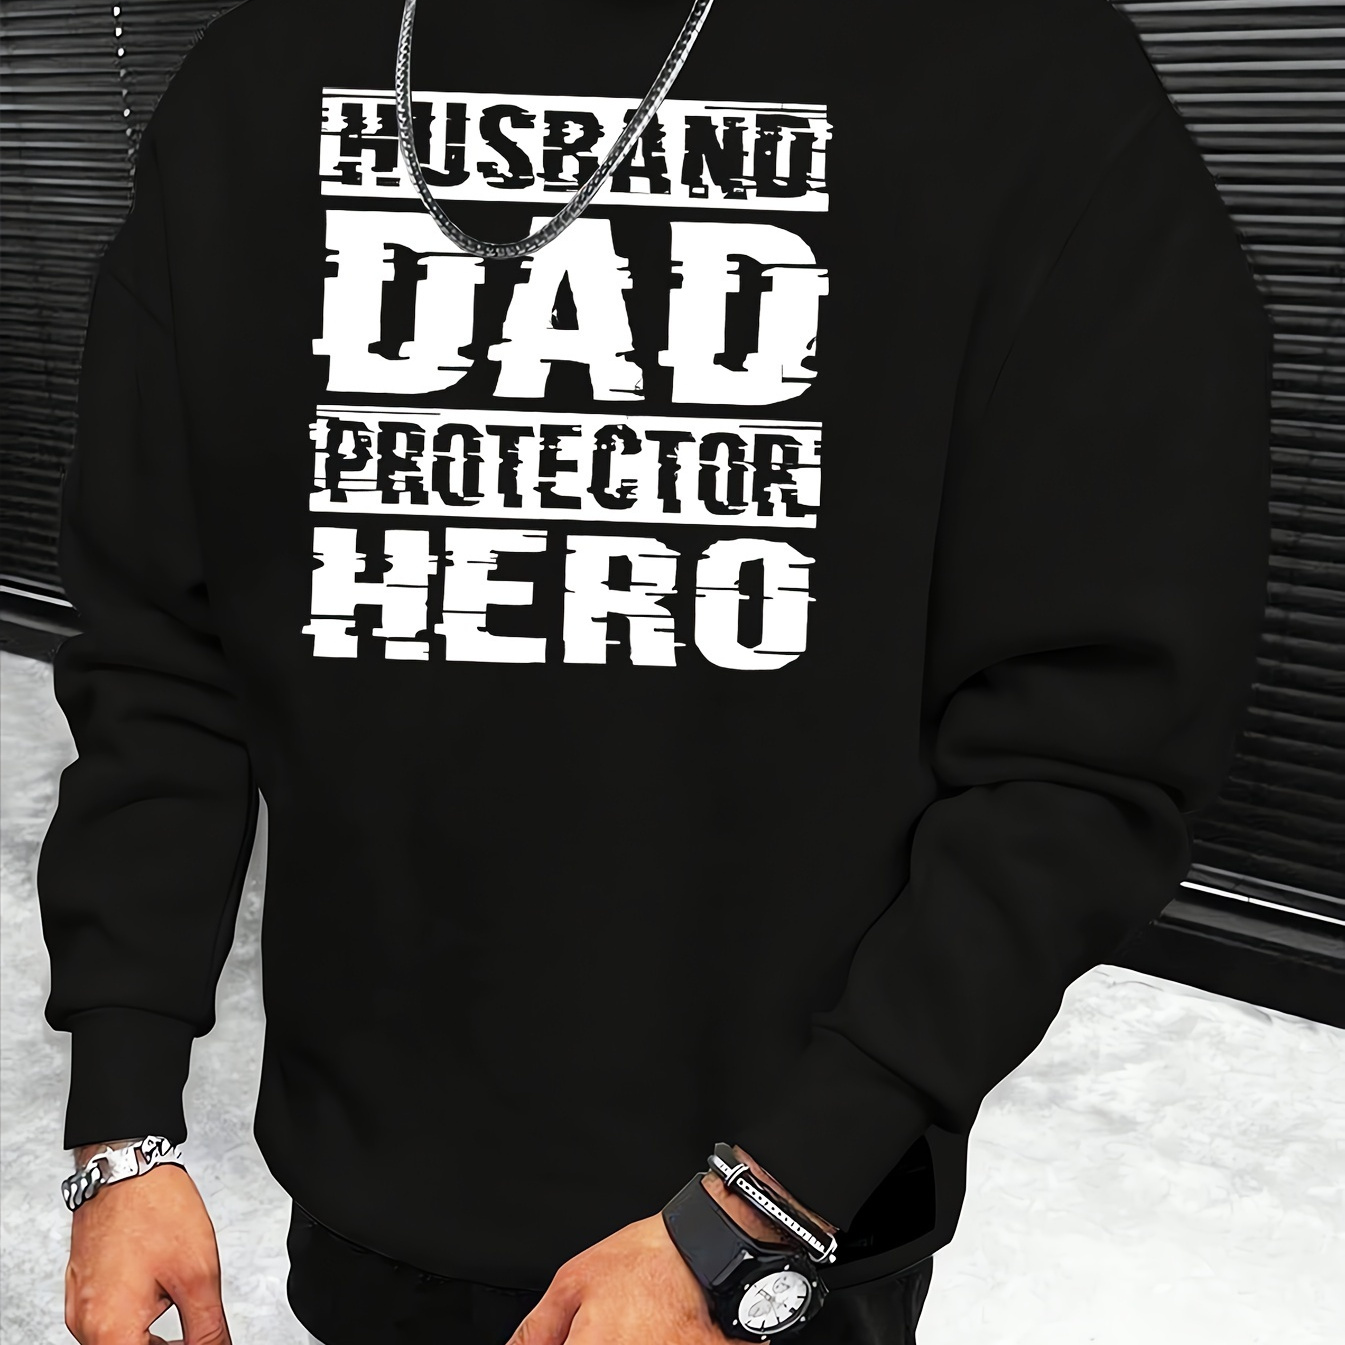 

Husband Dad Protector Hero Print, Sweatshirt With Long Sleeves, Men's Casual Creative Graphic Crew Neck Pullover Tops For Spring Fall And Winter